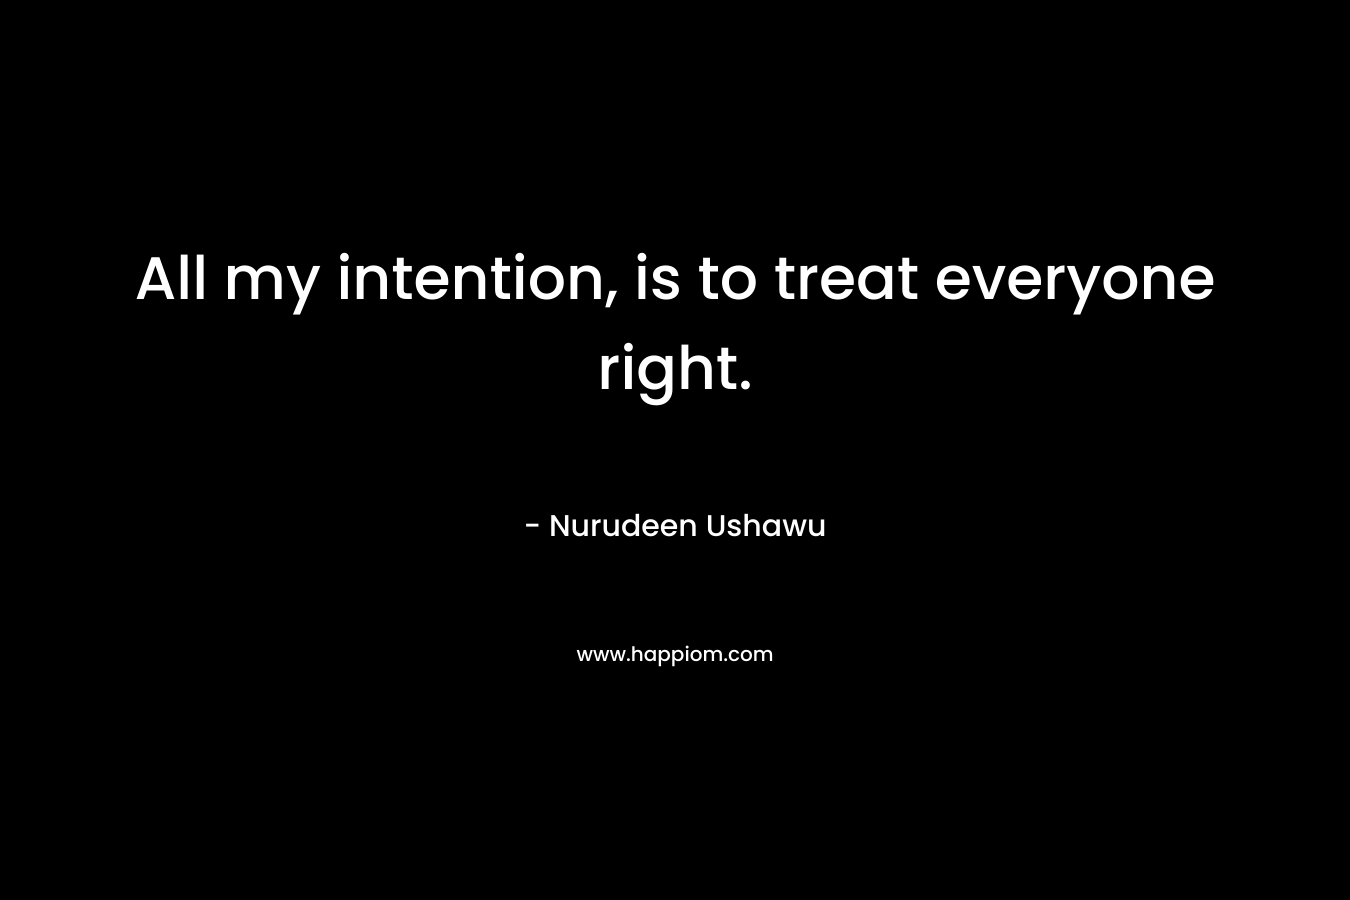 All my intention, is to treat everyone right.